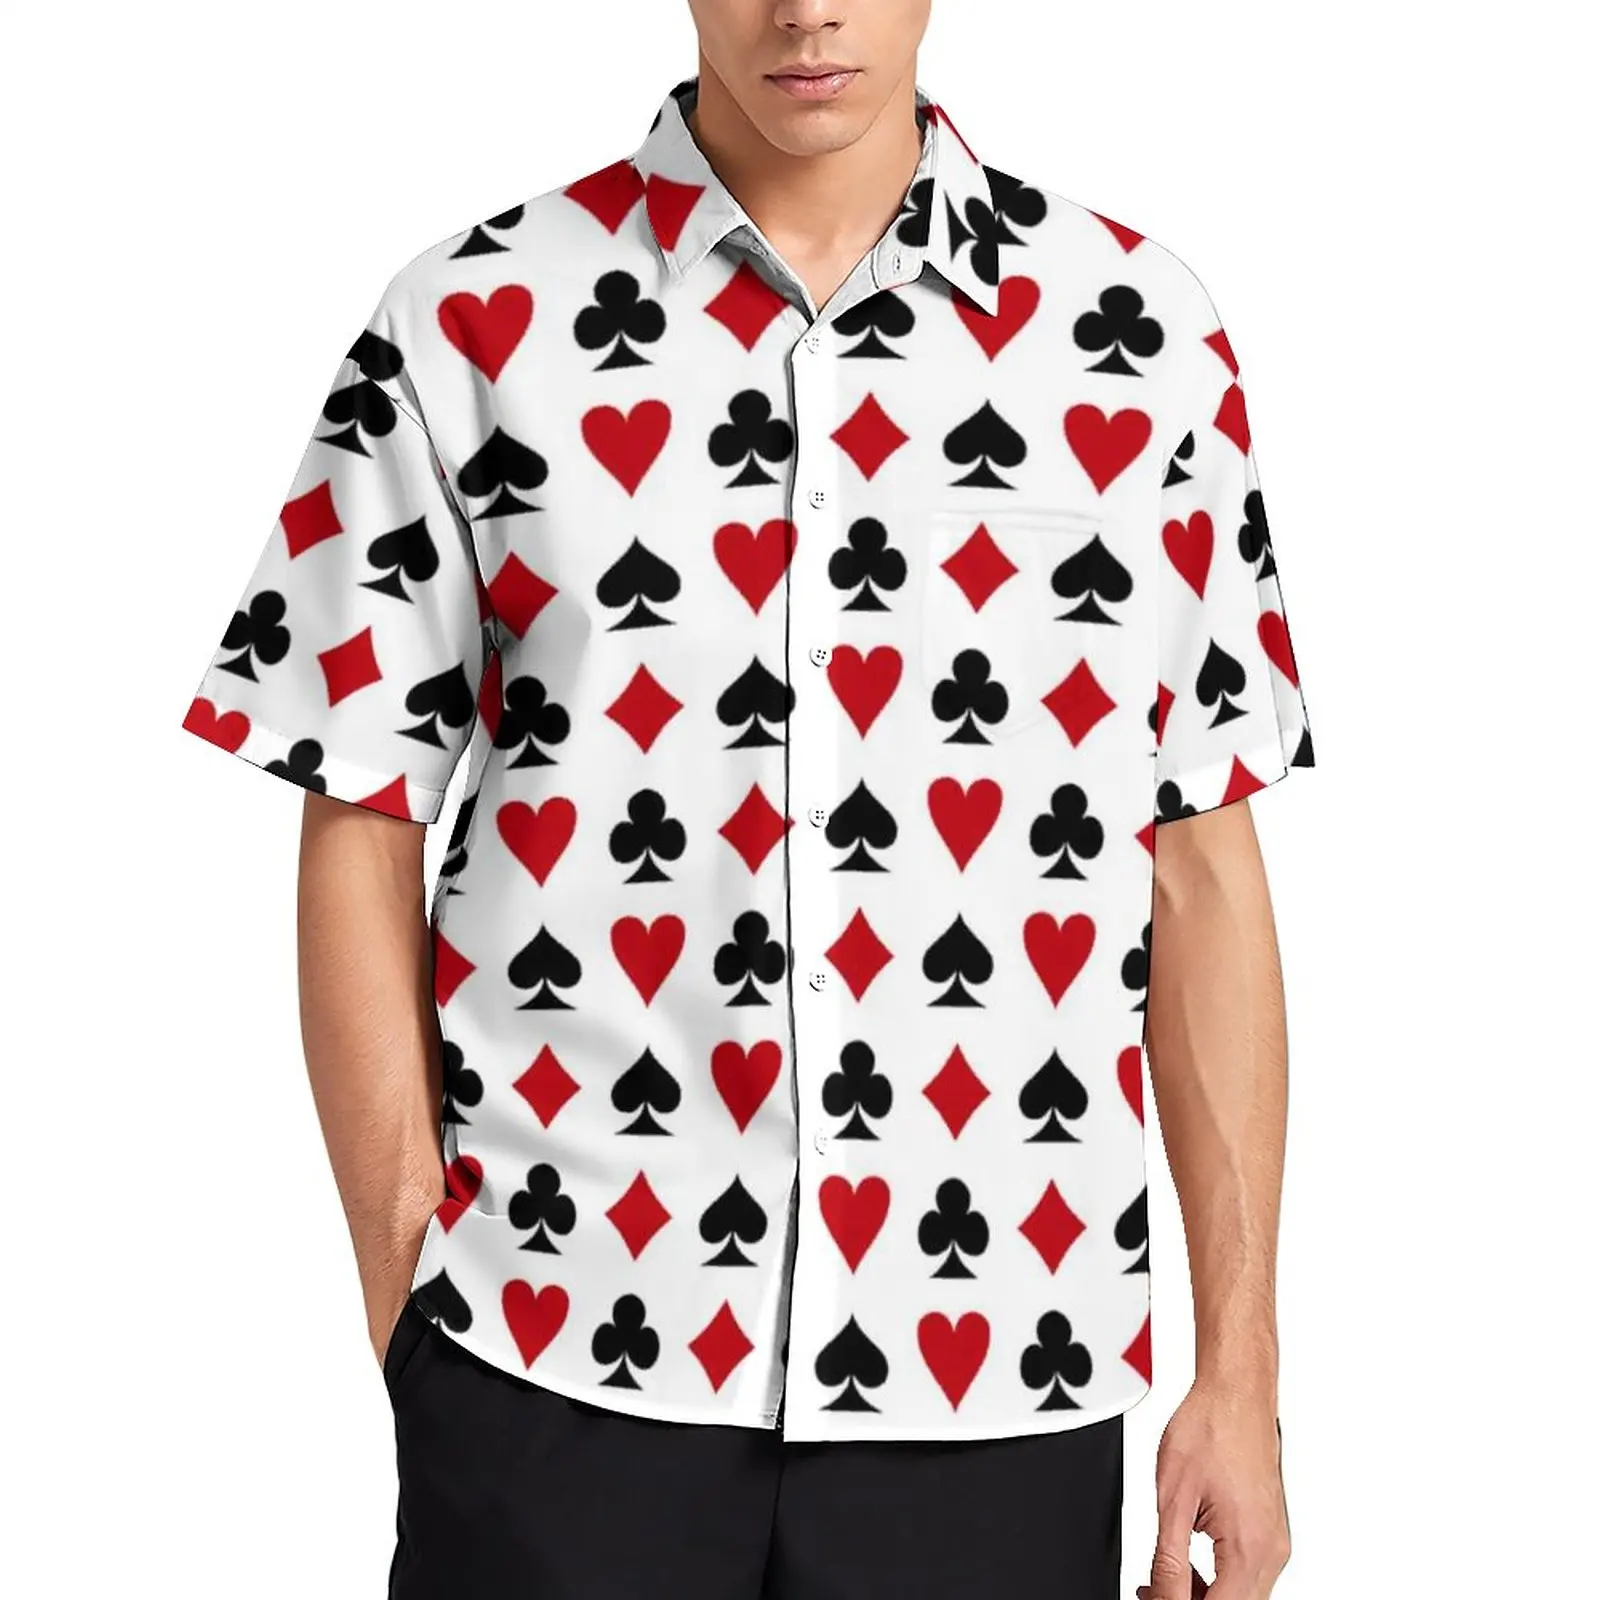 

Poker Heart Casual Shirts Card Suits Poker Style Lucky Vacation Shirt Hawaiian Trending Blouses Male Printed Plus Size 3XL 4XL